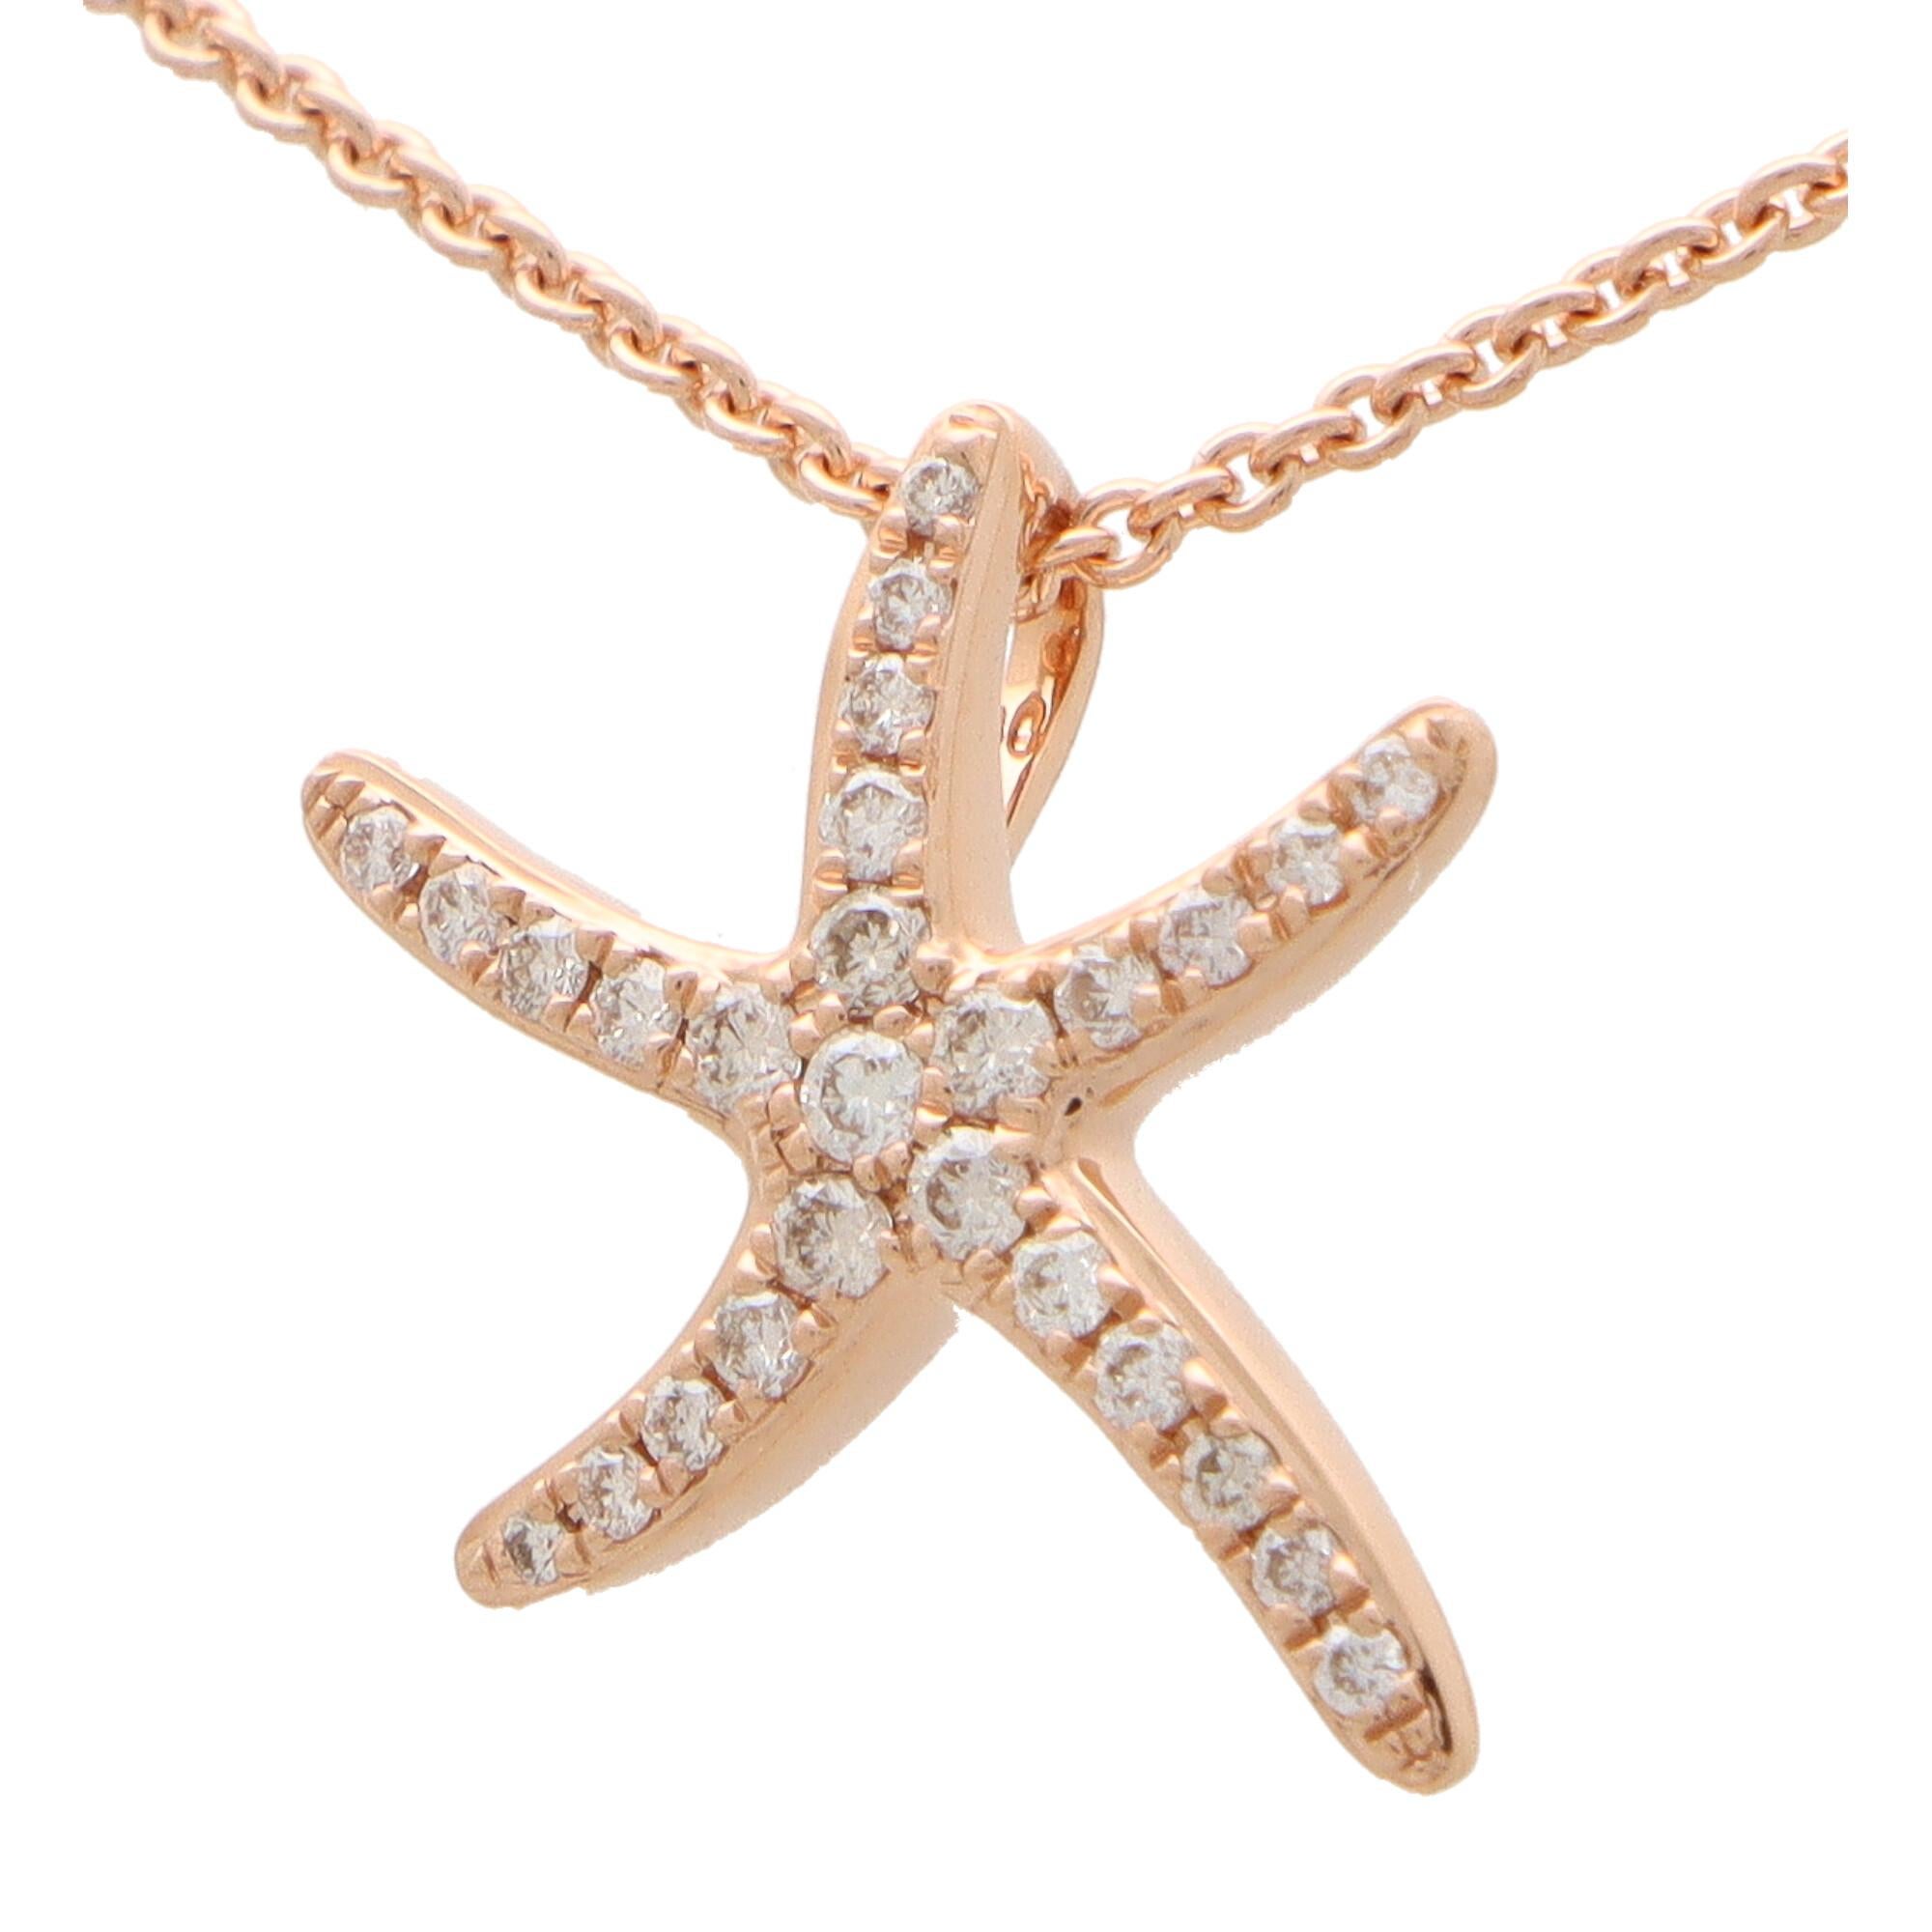 A lovely modern diamond set starfish pendant set in 18k rose gold.

The pendant is pave set throughout with 27 round brilliant cut diamonds within a starfish motif. Due to the design and size this pendant would make a perfect necklace to wear